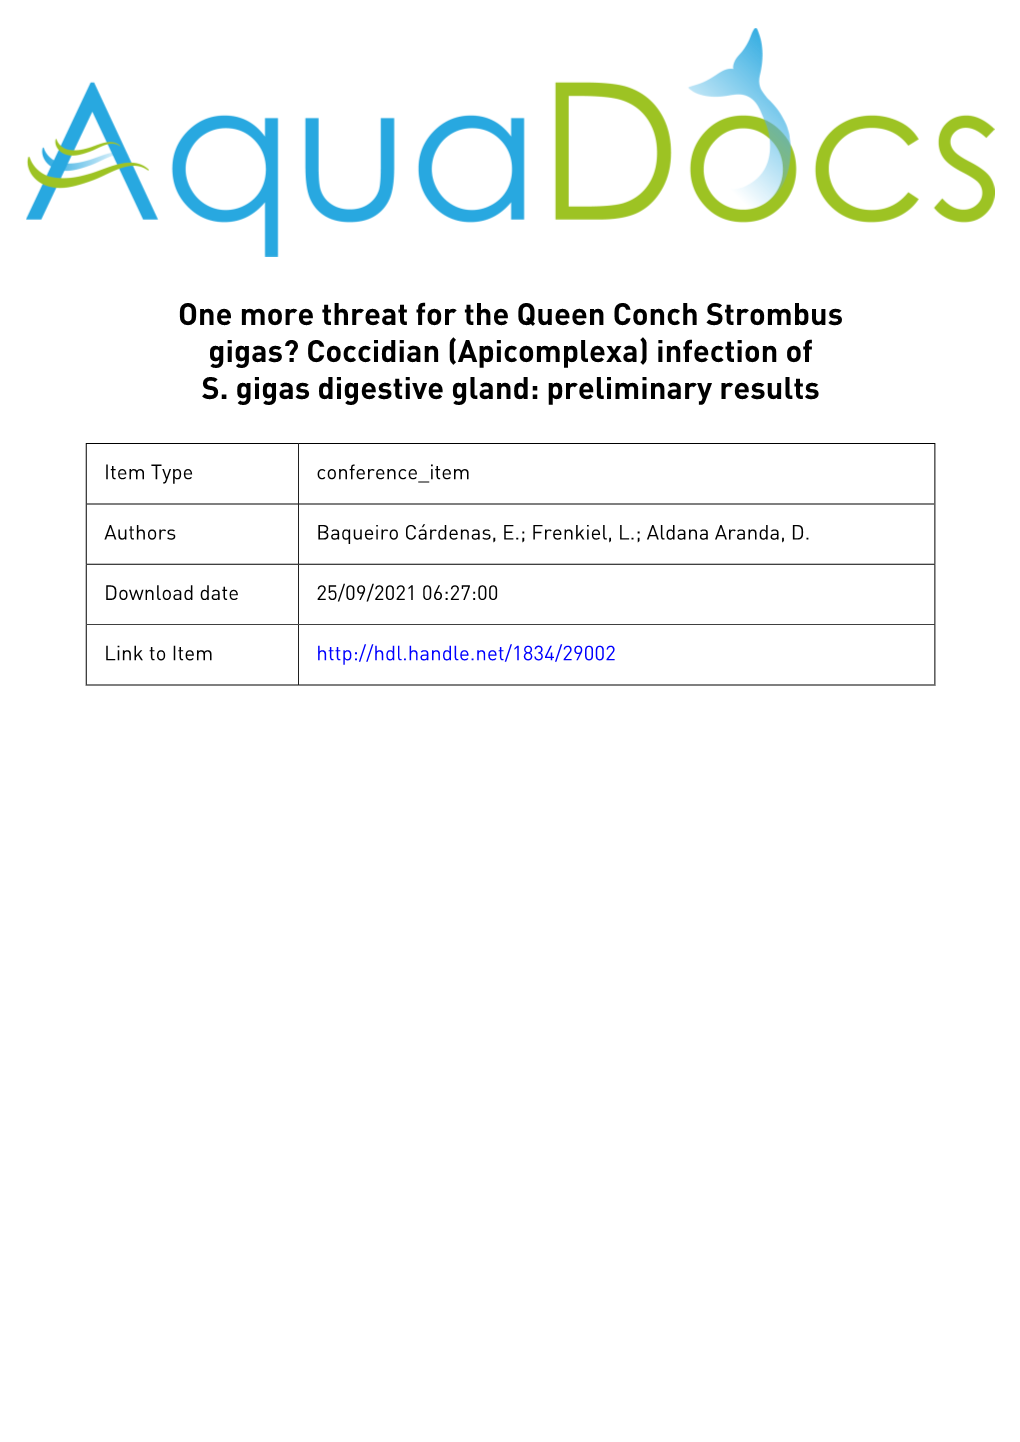 Coccidian (Apicomplexa) Infection of S. Gigas Digestive Gland: Preliminary Results